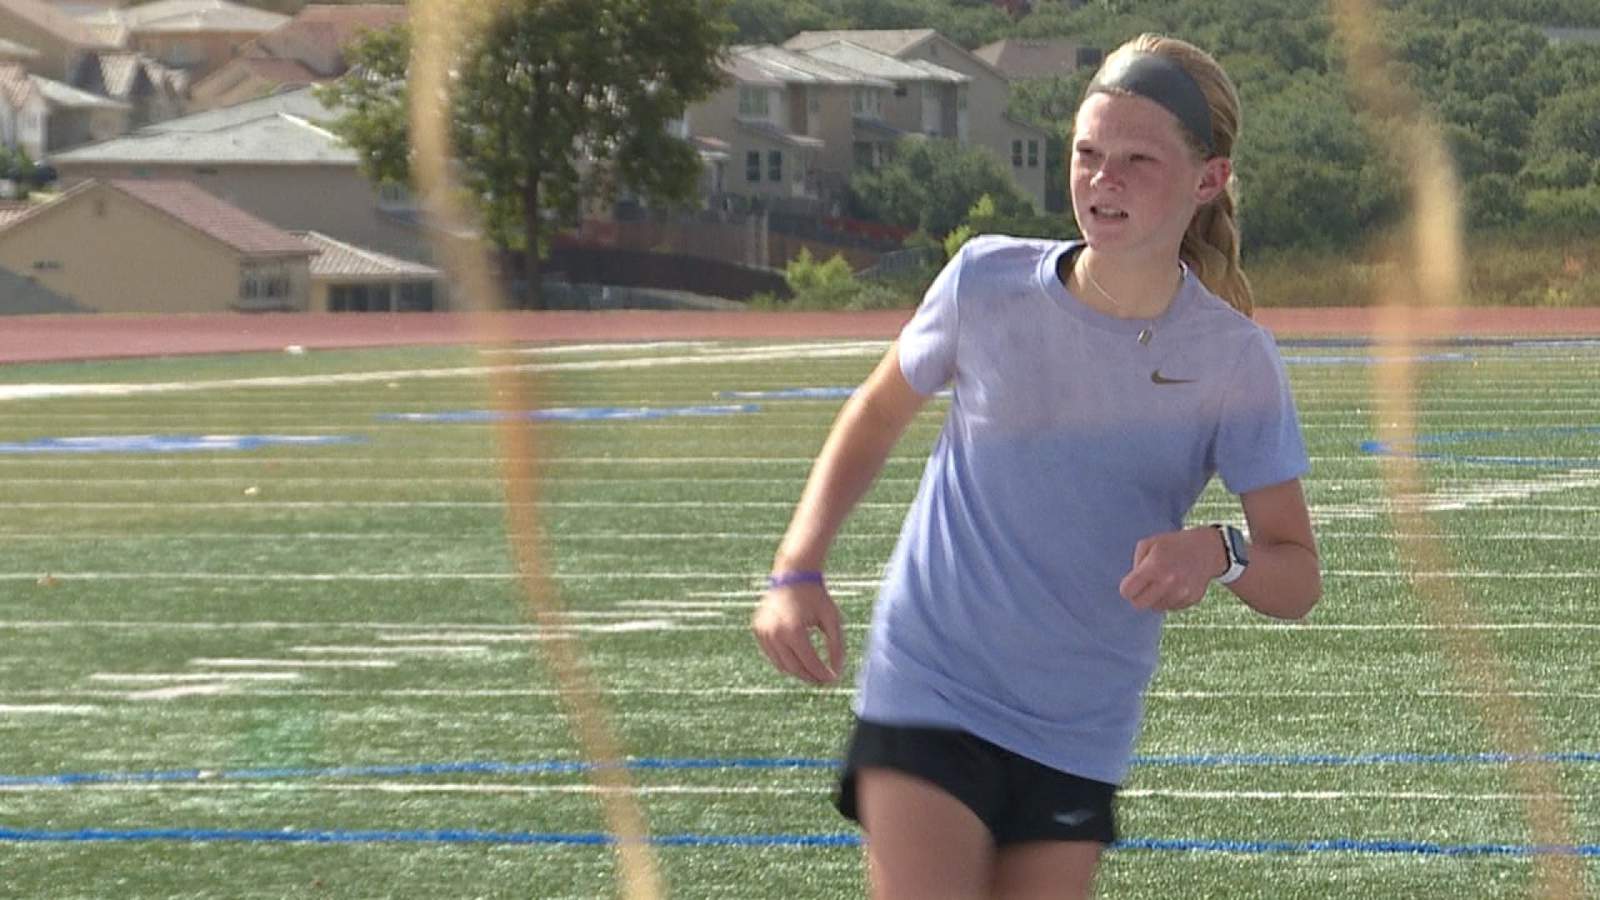 Viral youth soccer standout, Mabry Williams, trains daily in hopes of continued success